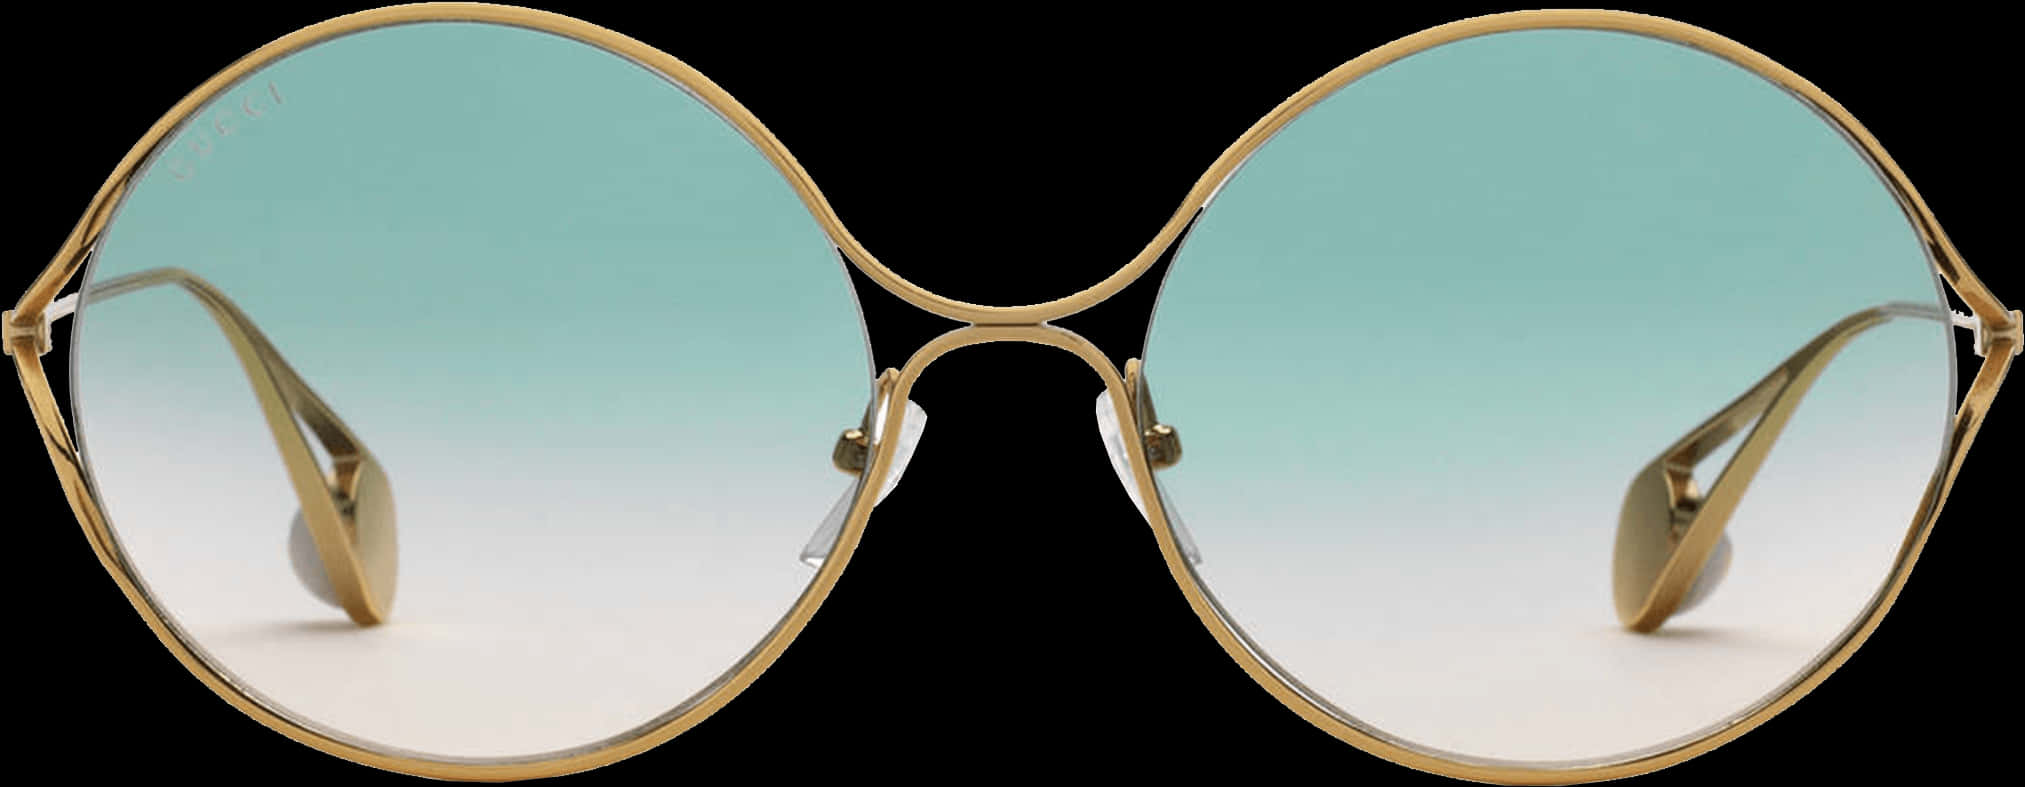 A Pair Of Sunglasses With A Blue And White Gradient Lens